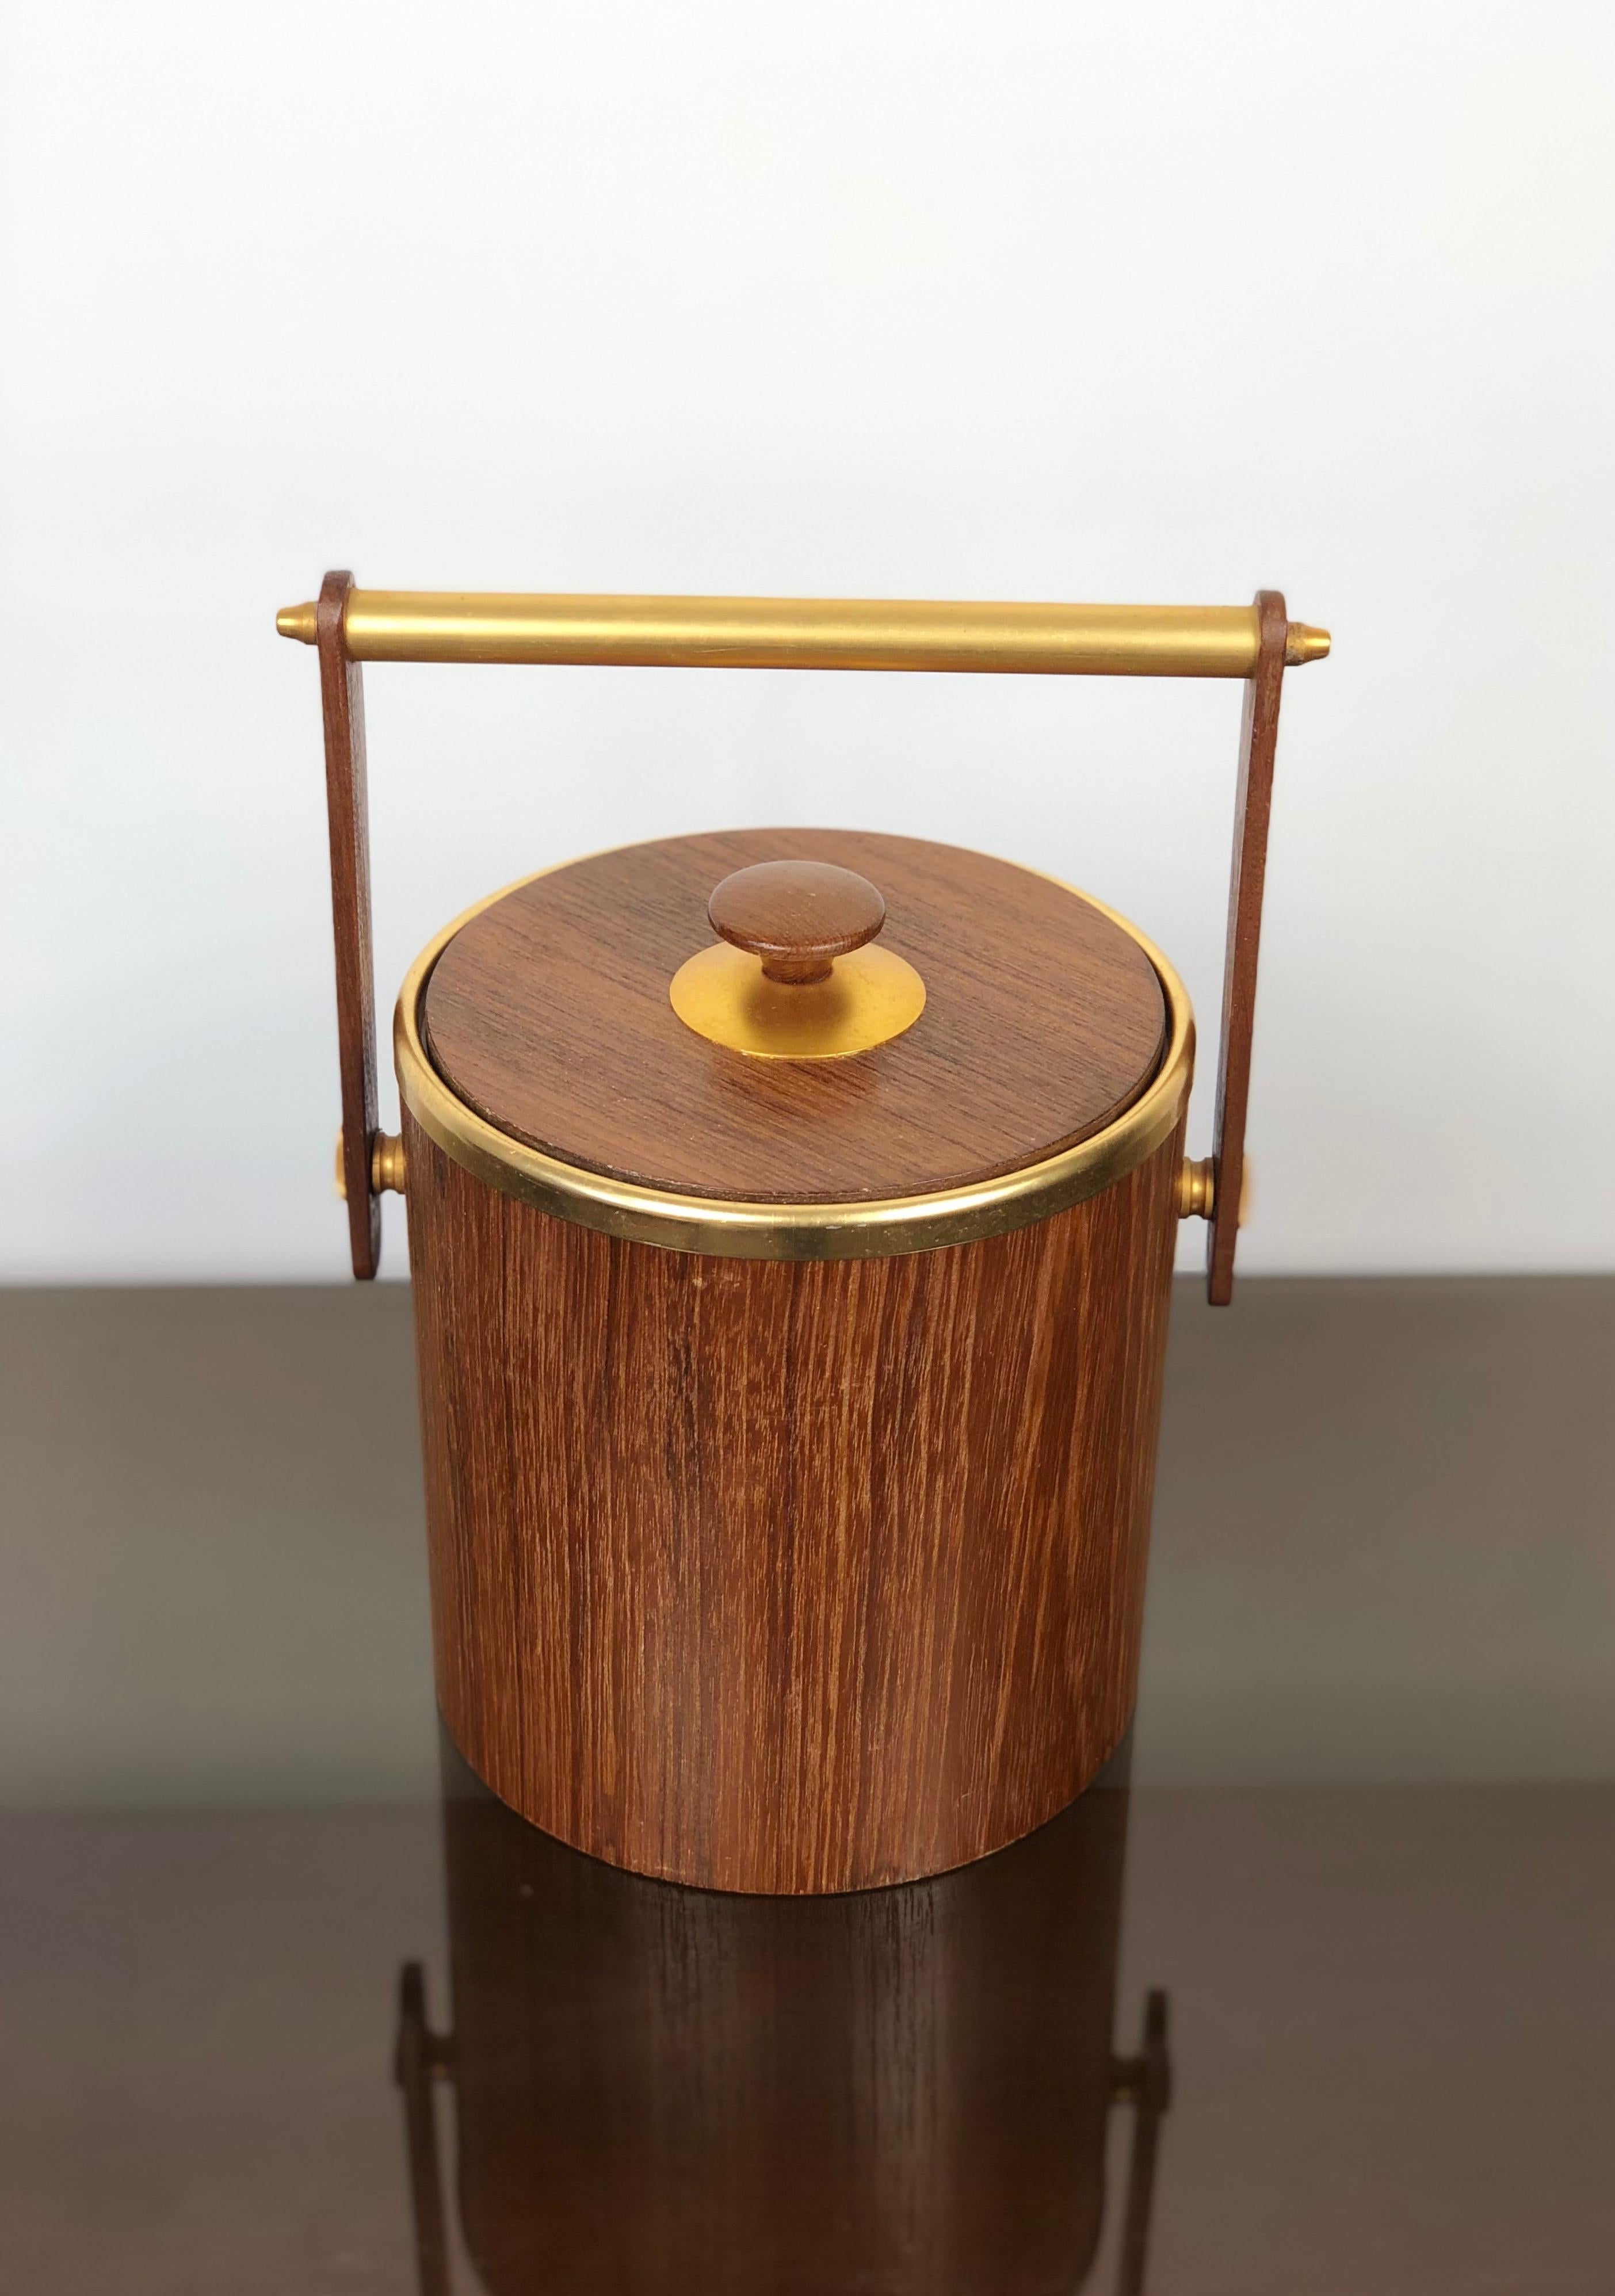 Italian Teak and Gold Metal Ice Bucket Holder, Made in Italy, 1960s For Sale